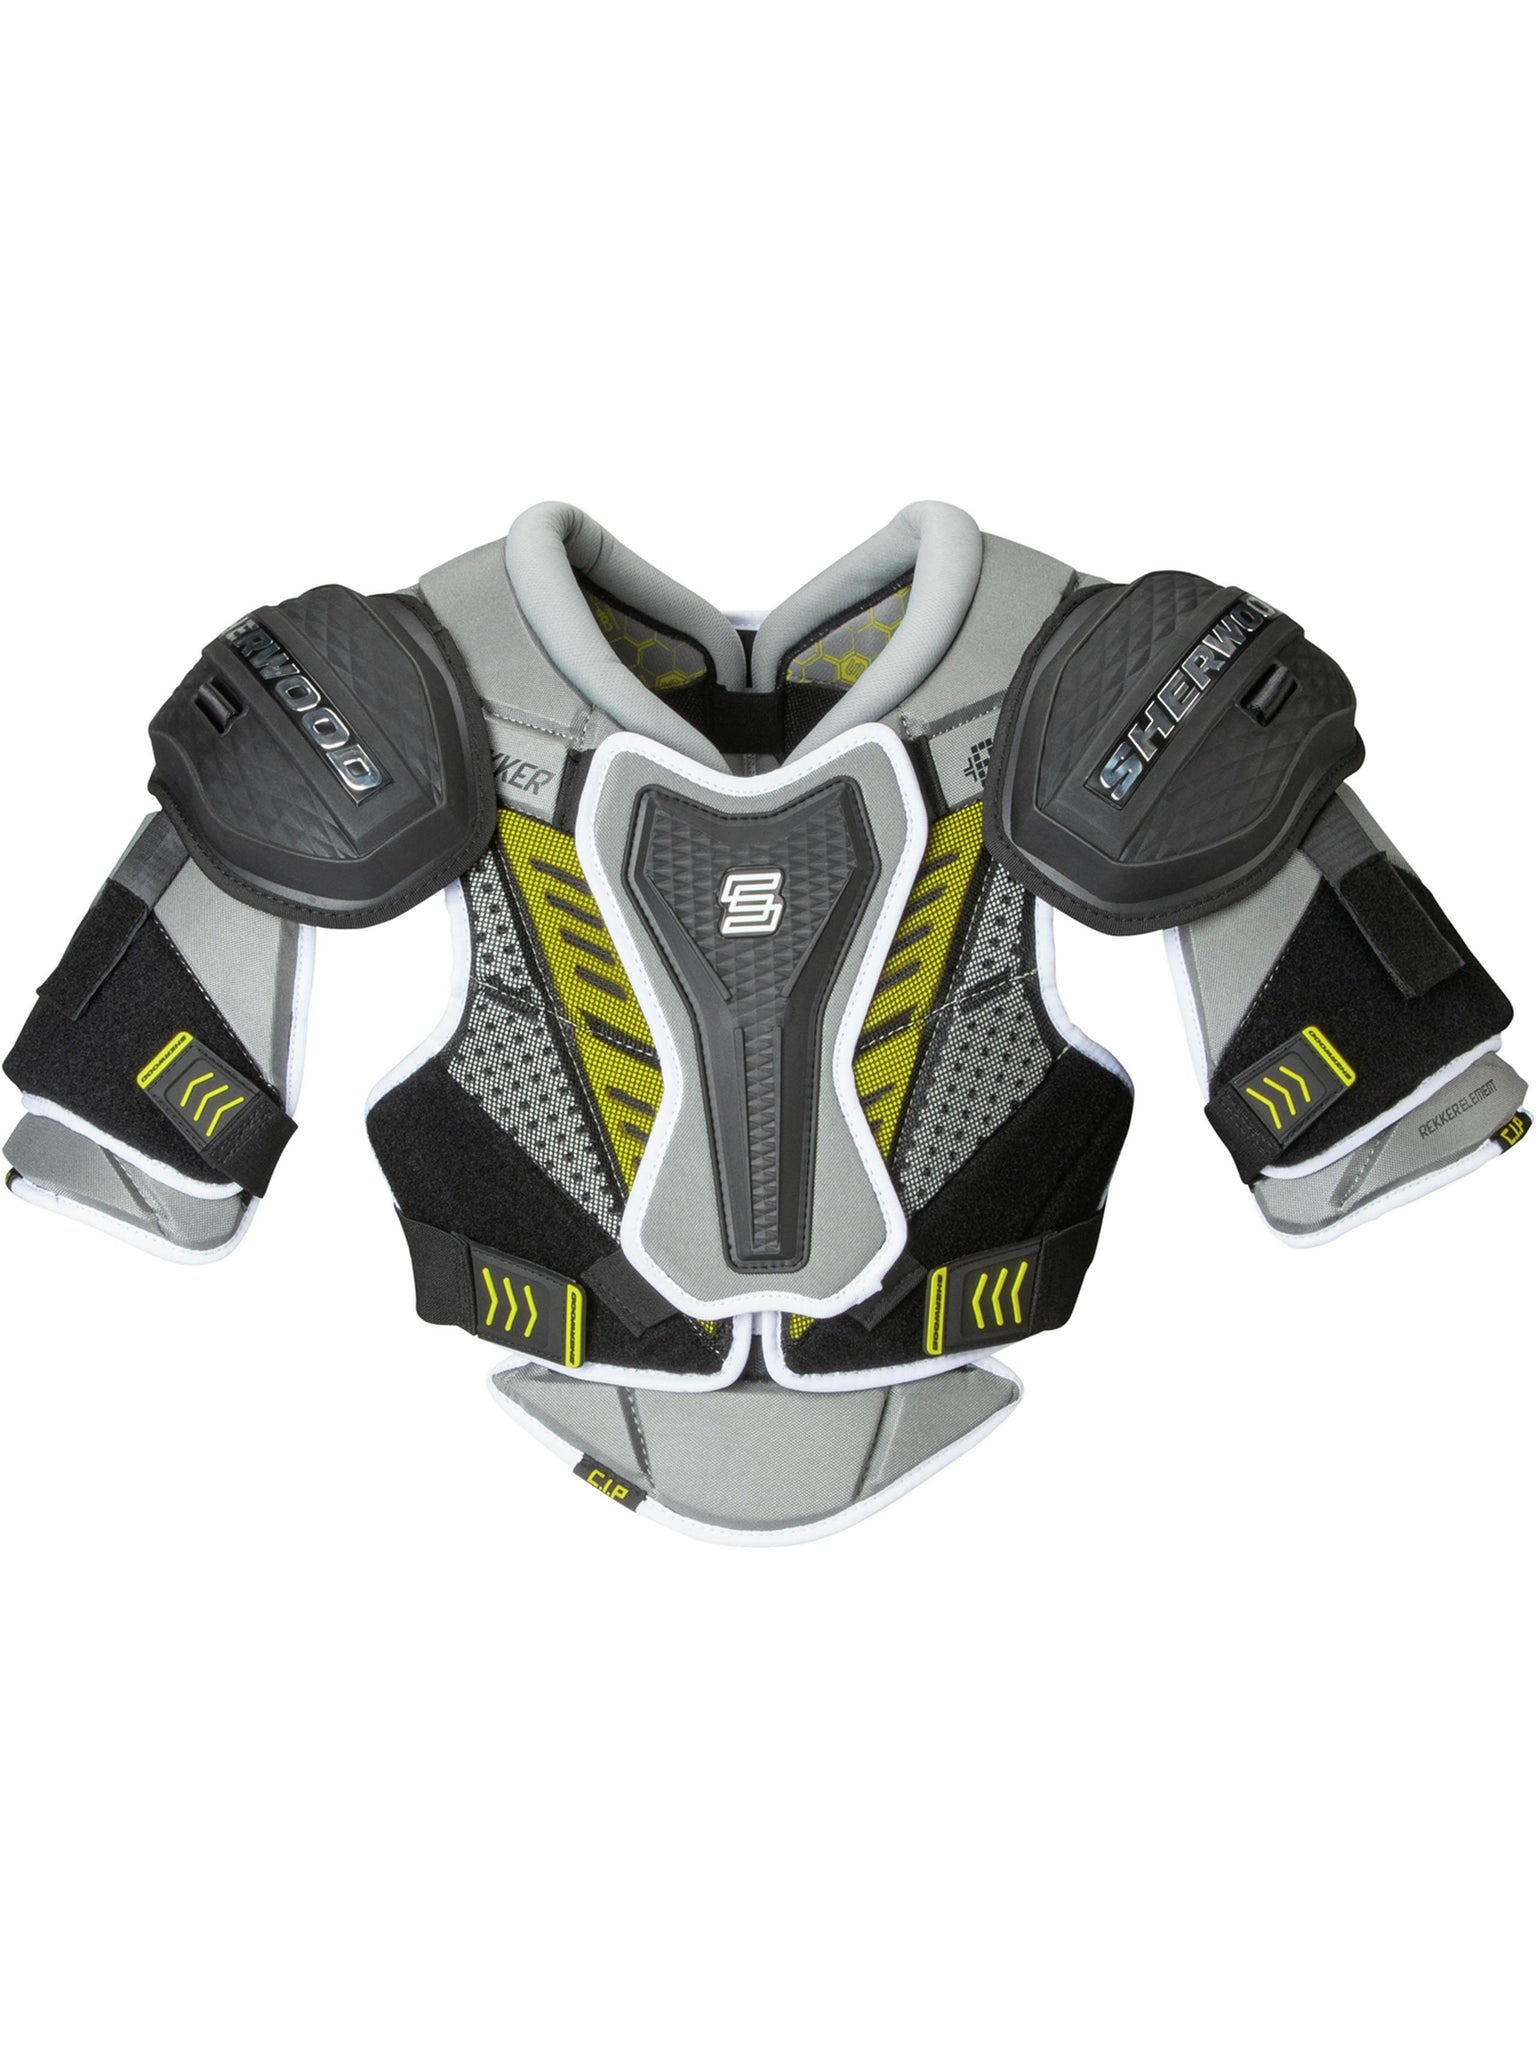 How to Select a Hockey Shoulder Pad